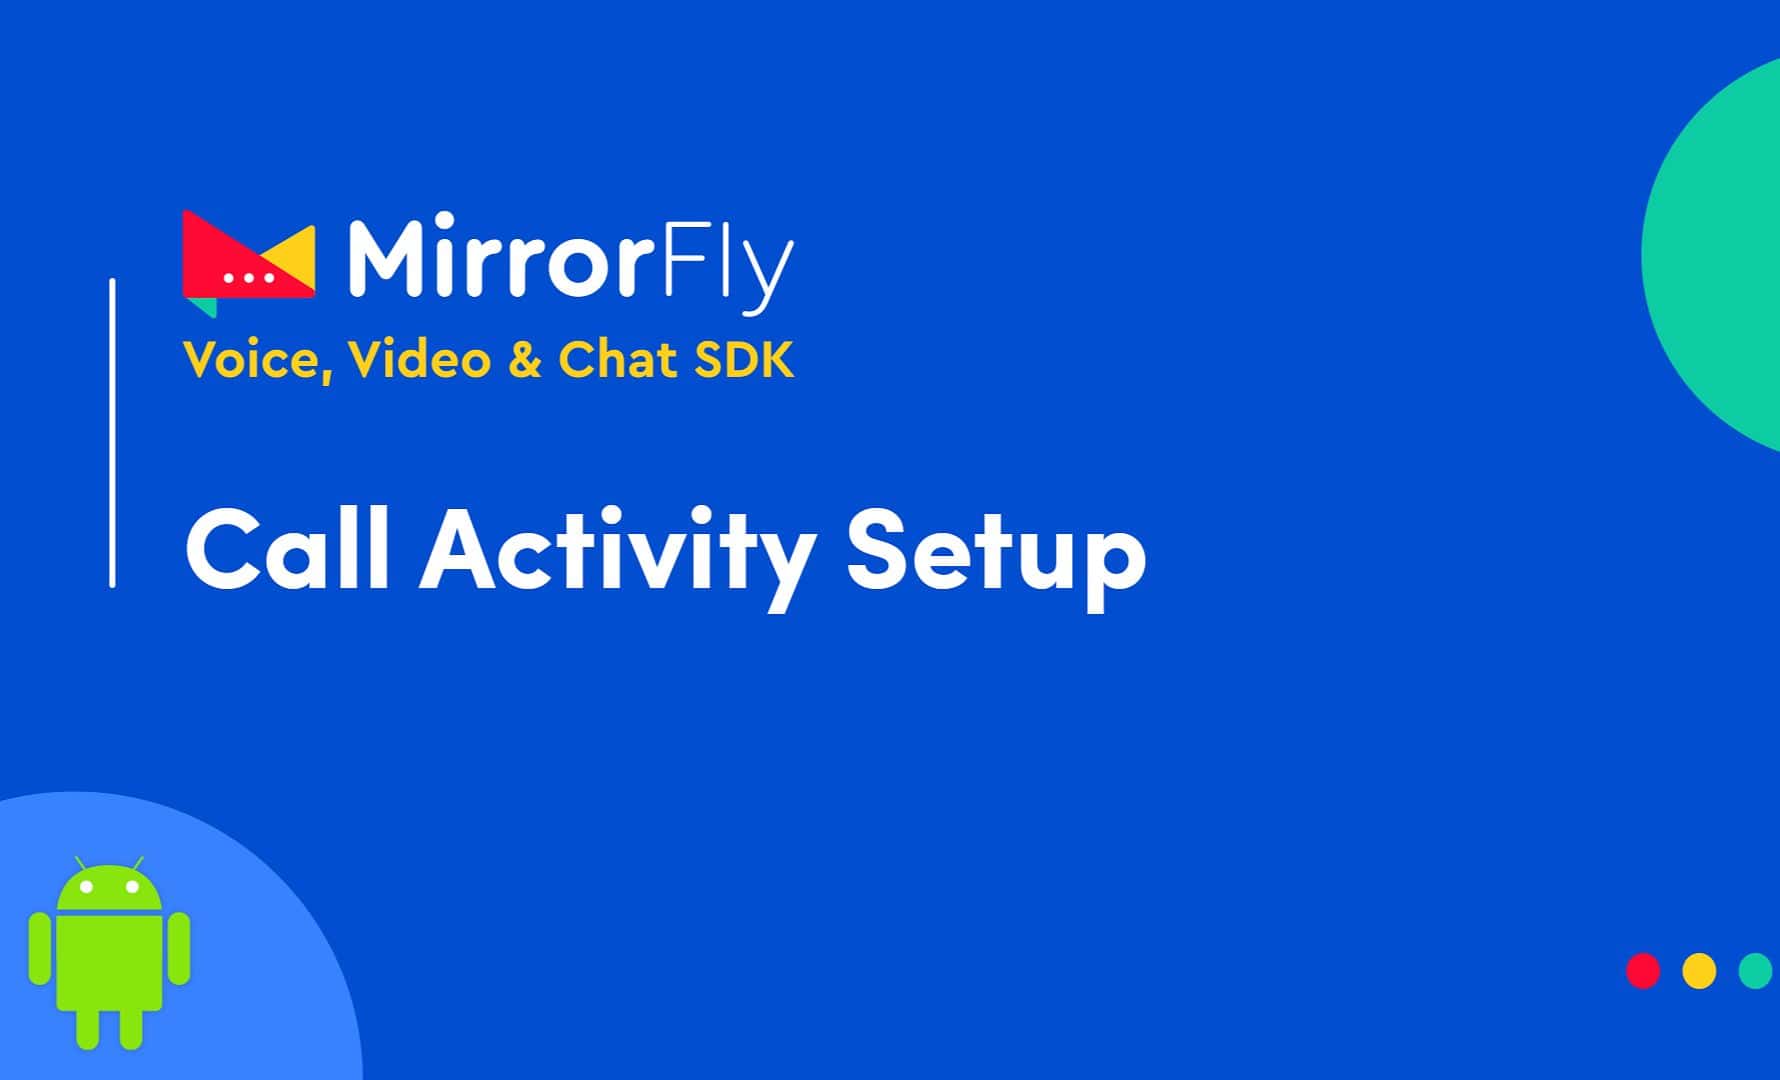 Setup Call Activity in Android Studio using MirrorFly SDK